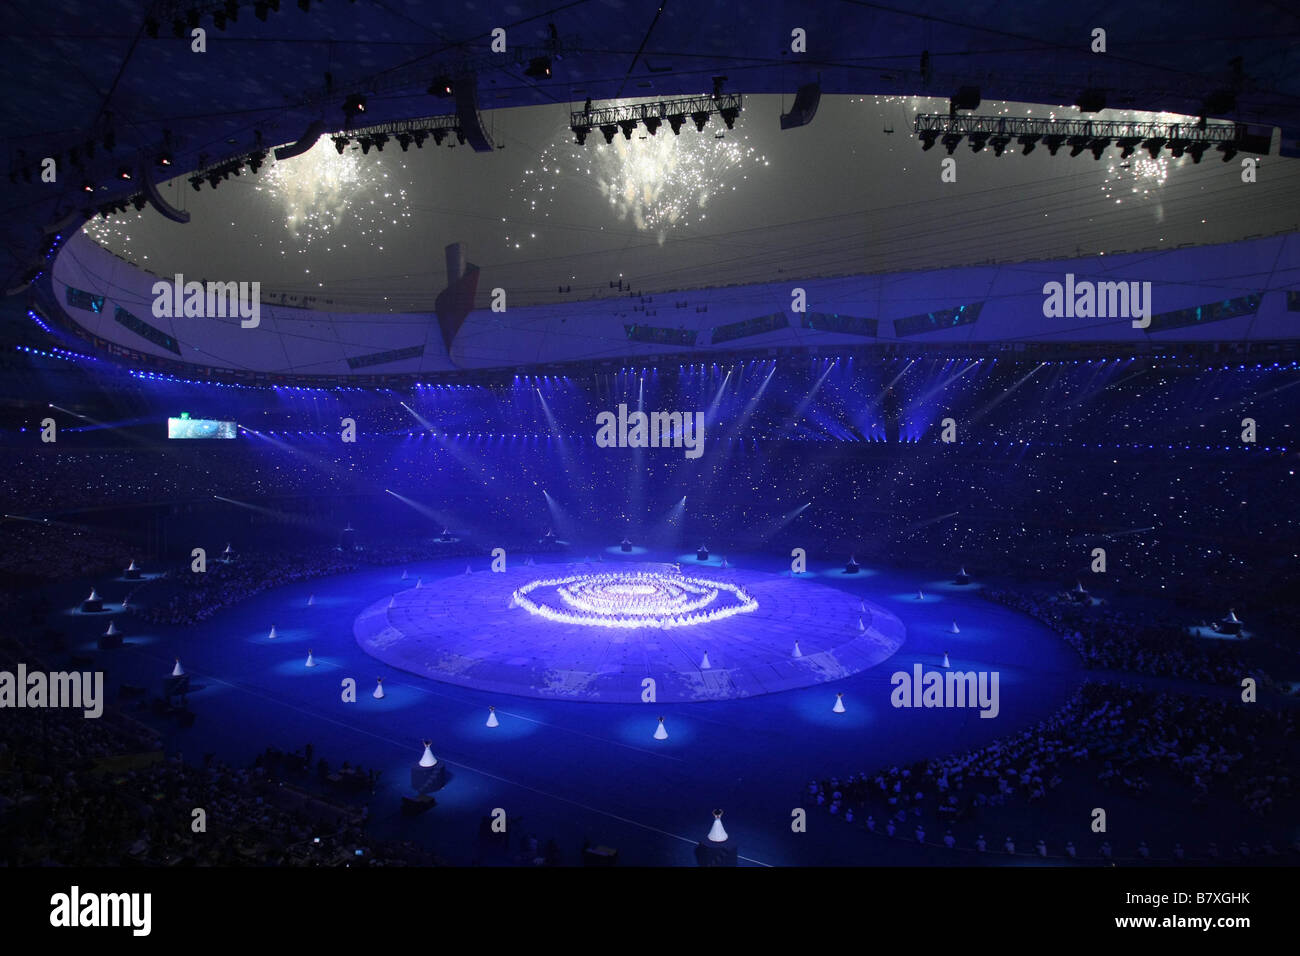 Opening Ceremony For The Paralympic Games SEPTEMBER 6 2008 Opening Ceremony during the Opening Ceremony for the 2008 Beijing Summer Paralympic at the National Stadium Beijing China Photo by Akihiro Sugimoto AFLO SPORT 1080 Stock Photo